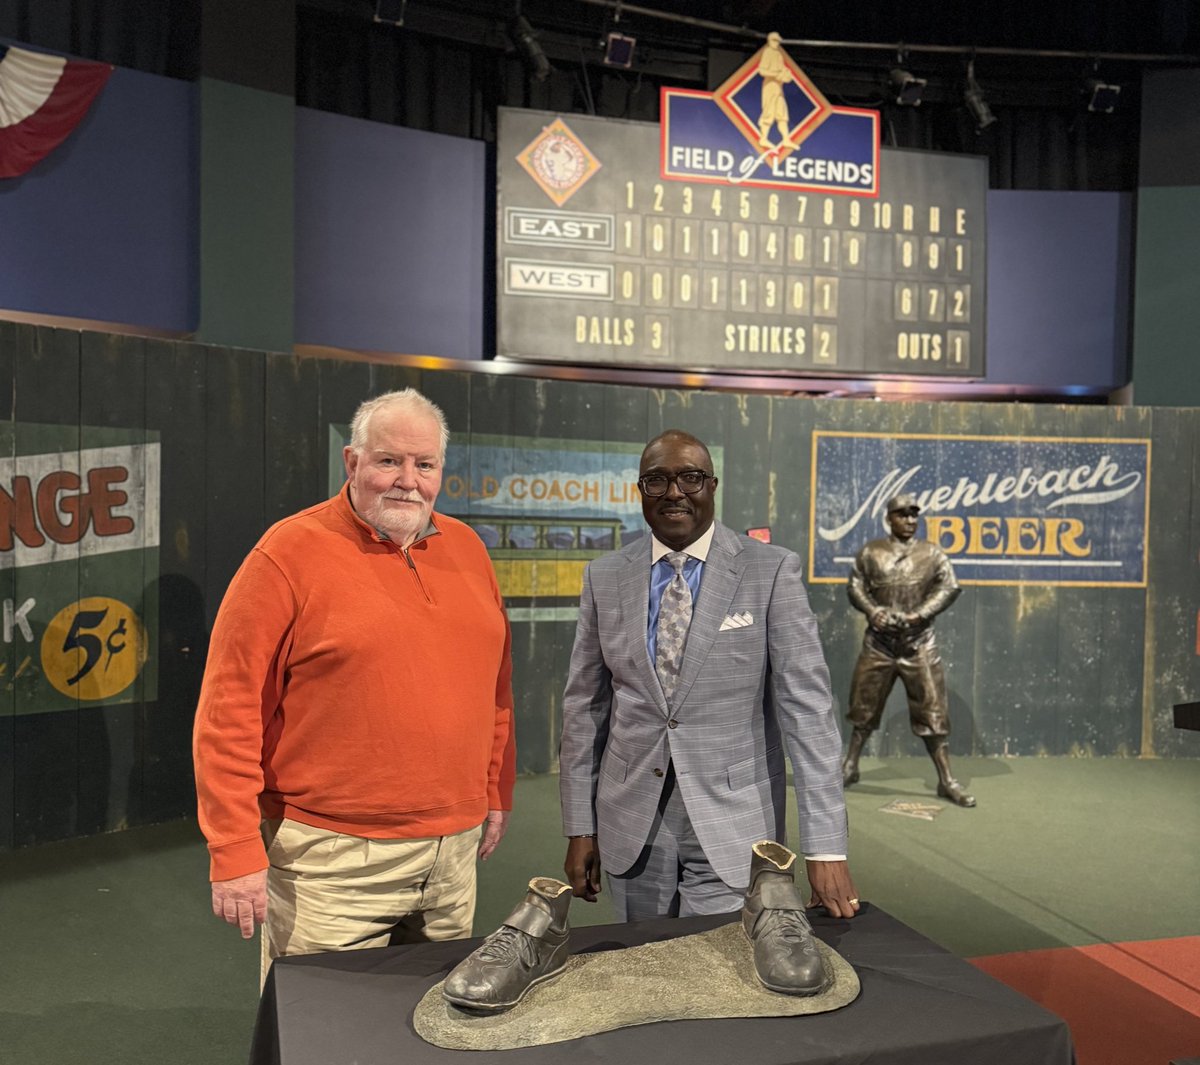 The cleats, the only remaining remnants from the Jackie Robinson statue stolen from McAdams Park in Wichita & destroyed, are officially home at the Negro Leagues Baseball Museum! @nlbmprez joins League 42 founder & Exec. Director, @boblutz. The museum will display the remnants…